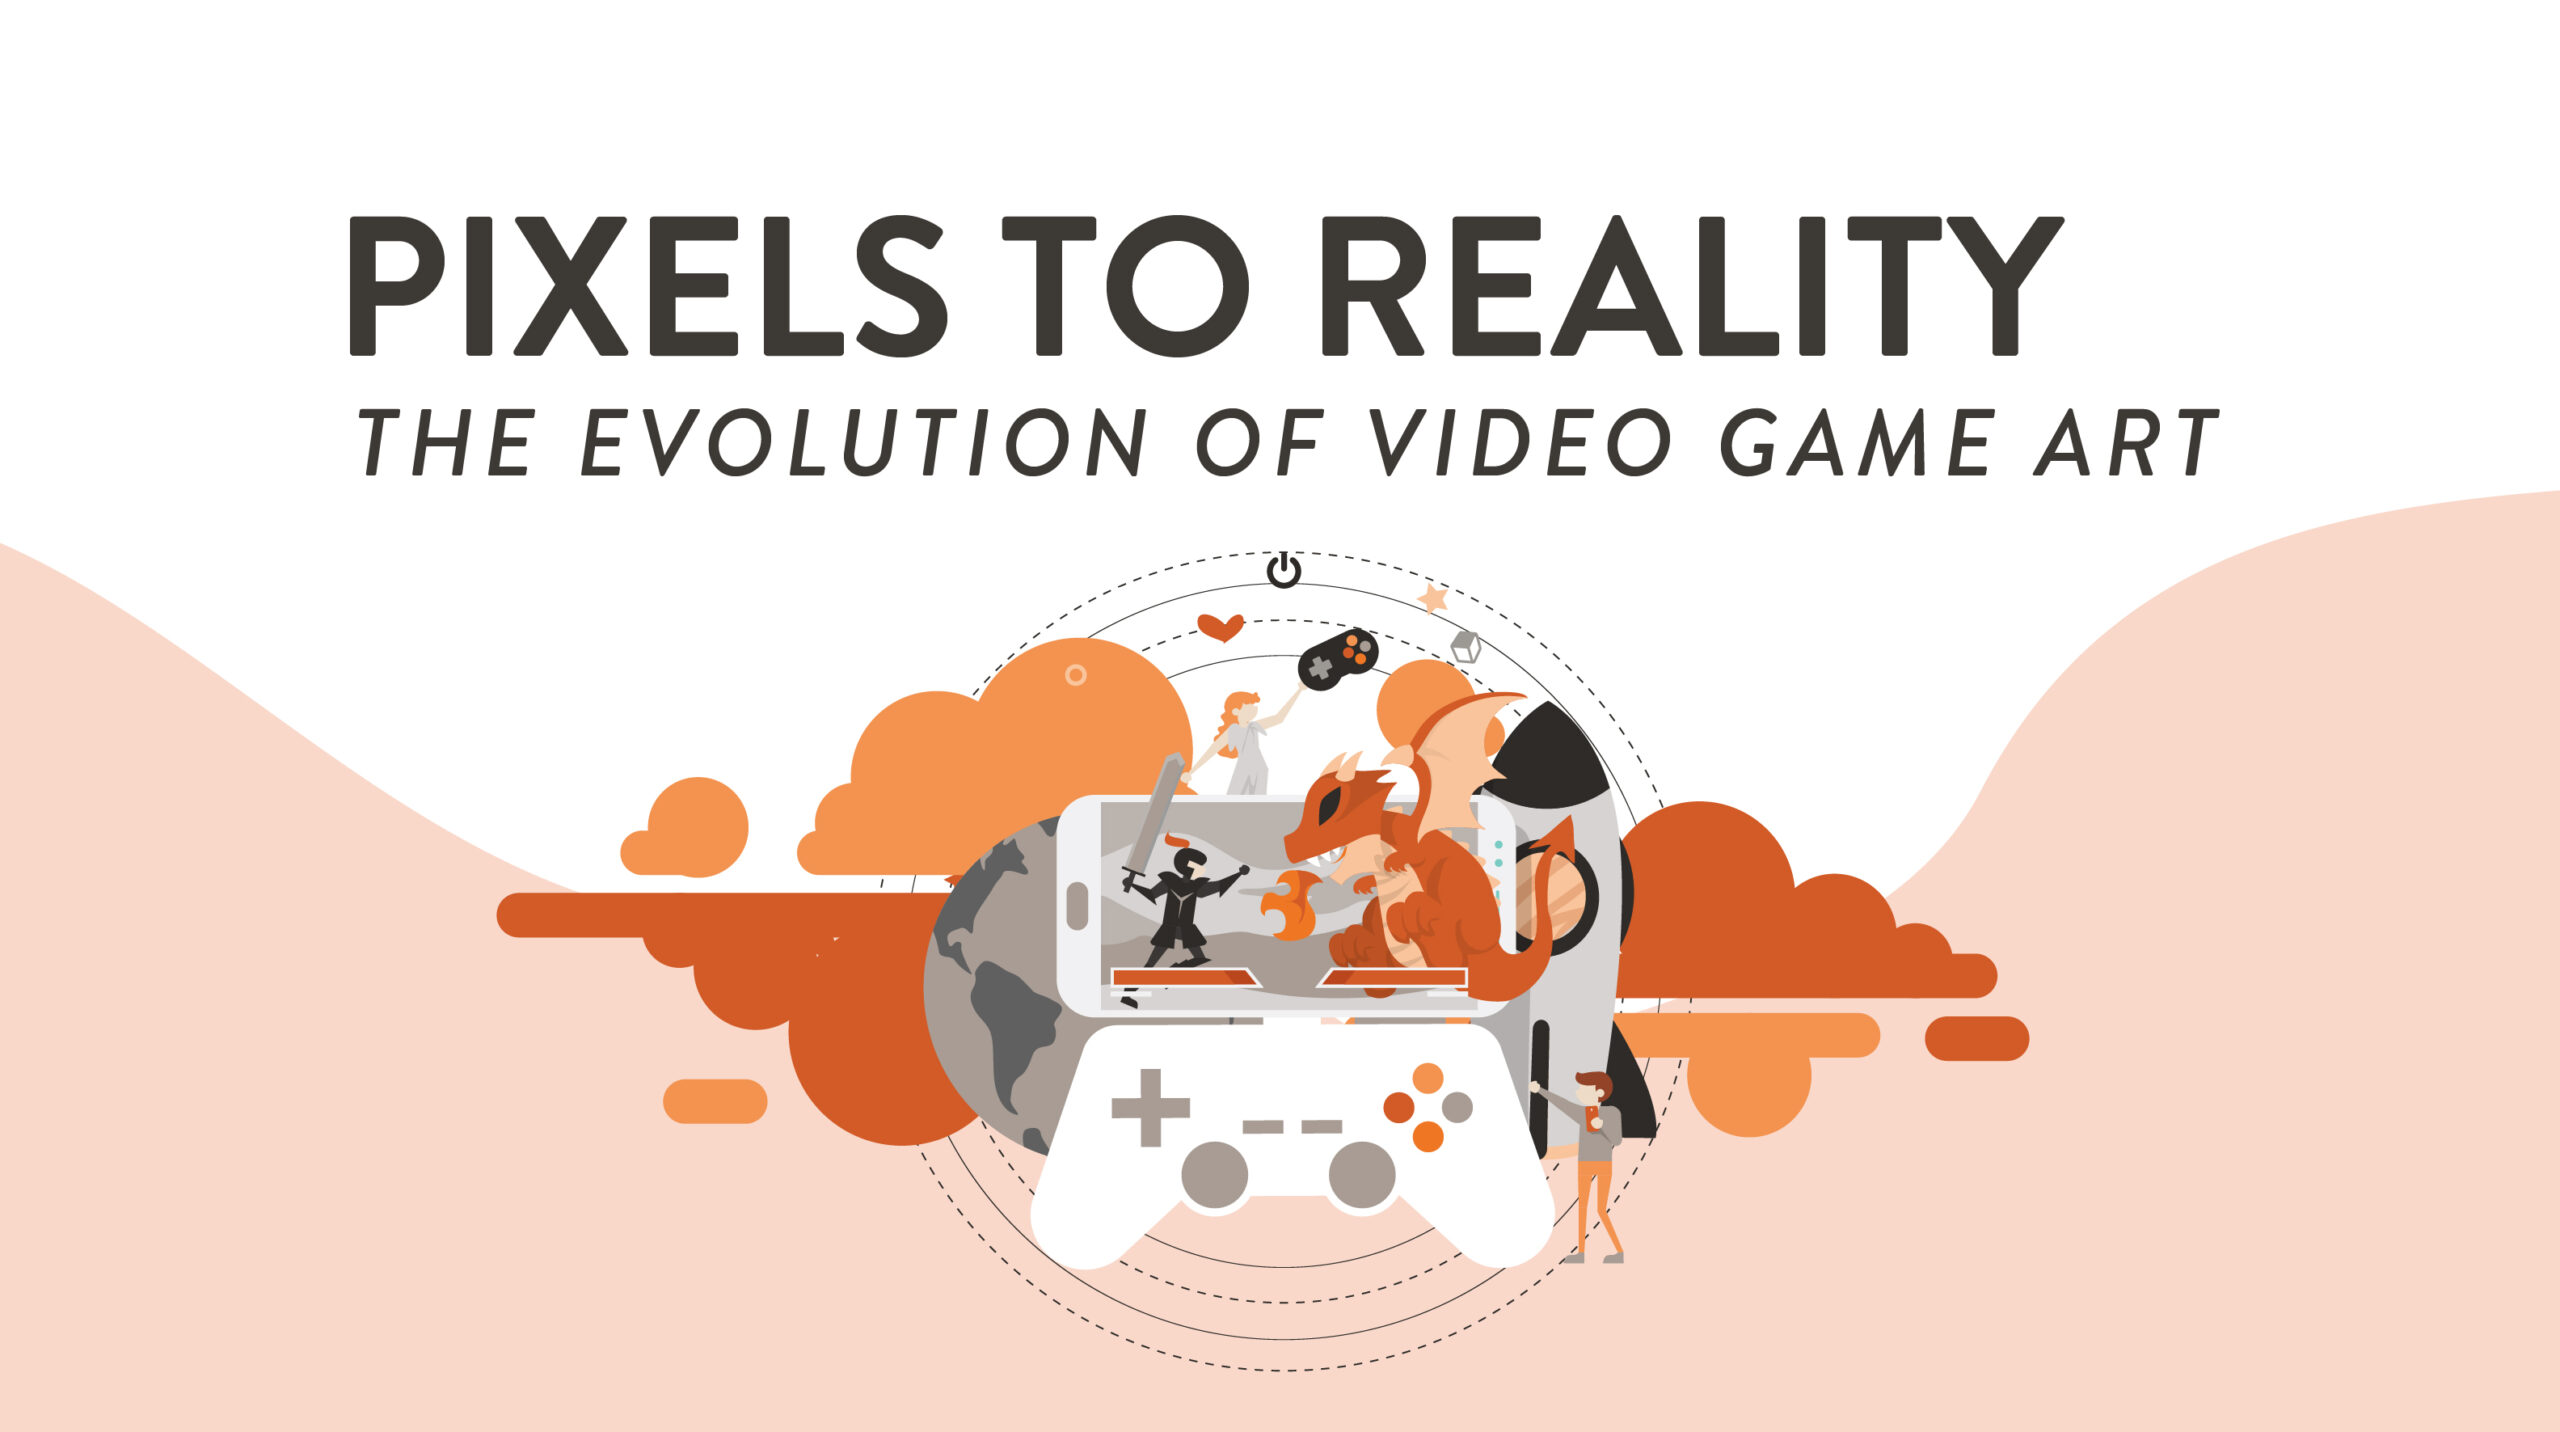 The Evolution Of Video Games From Pixels To Realism